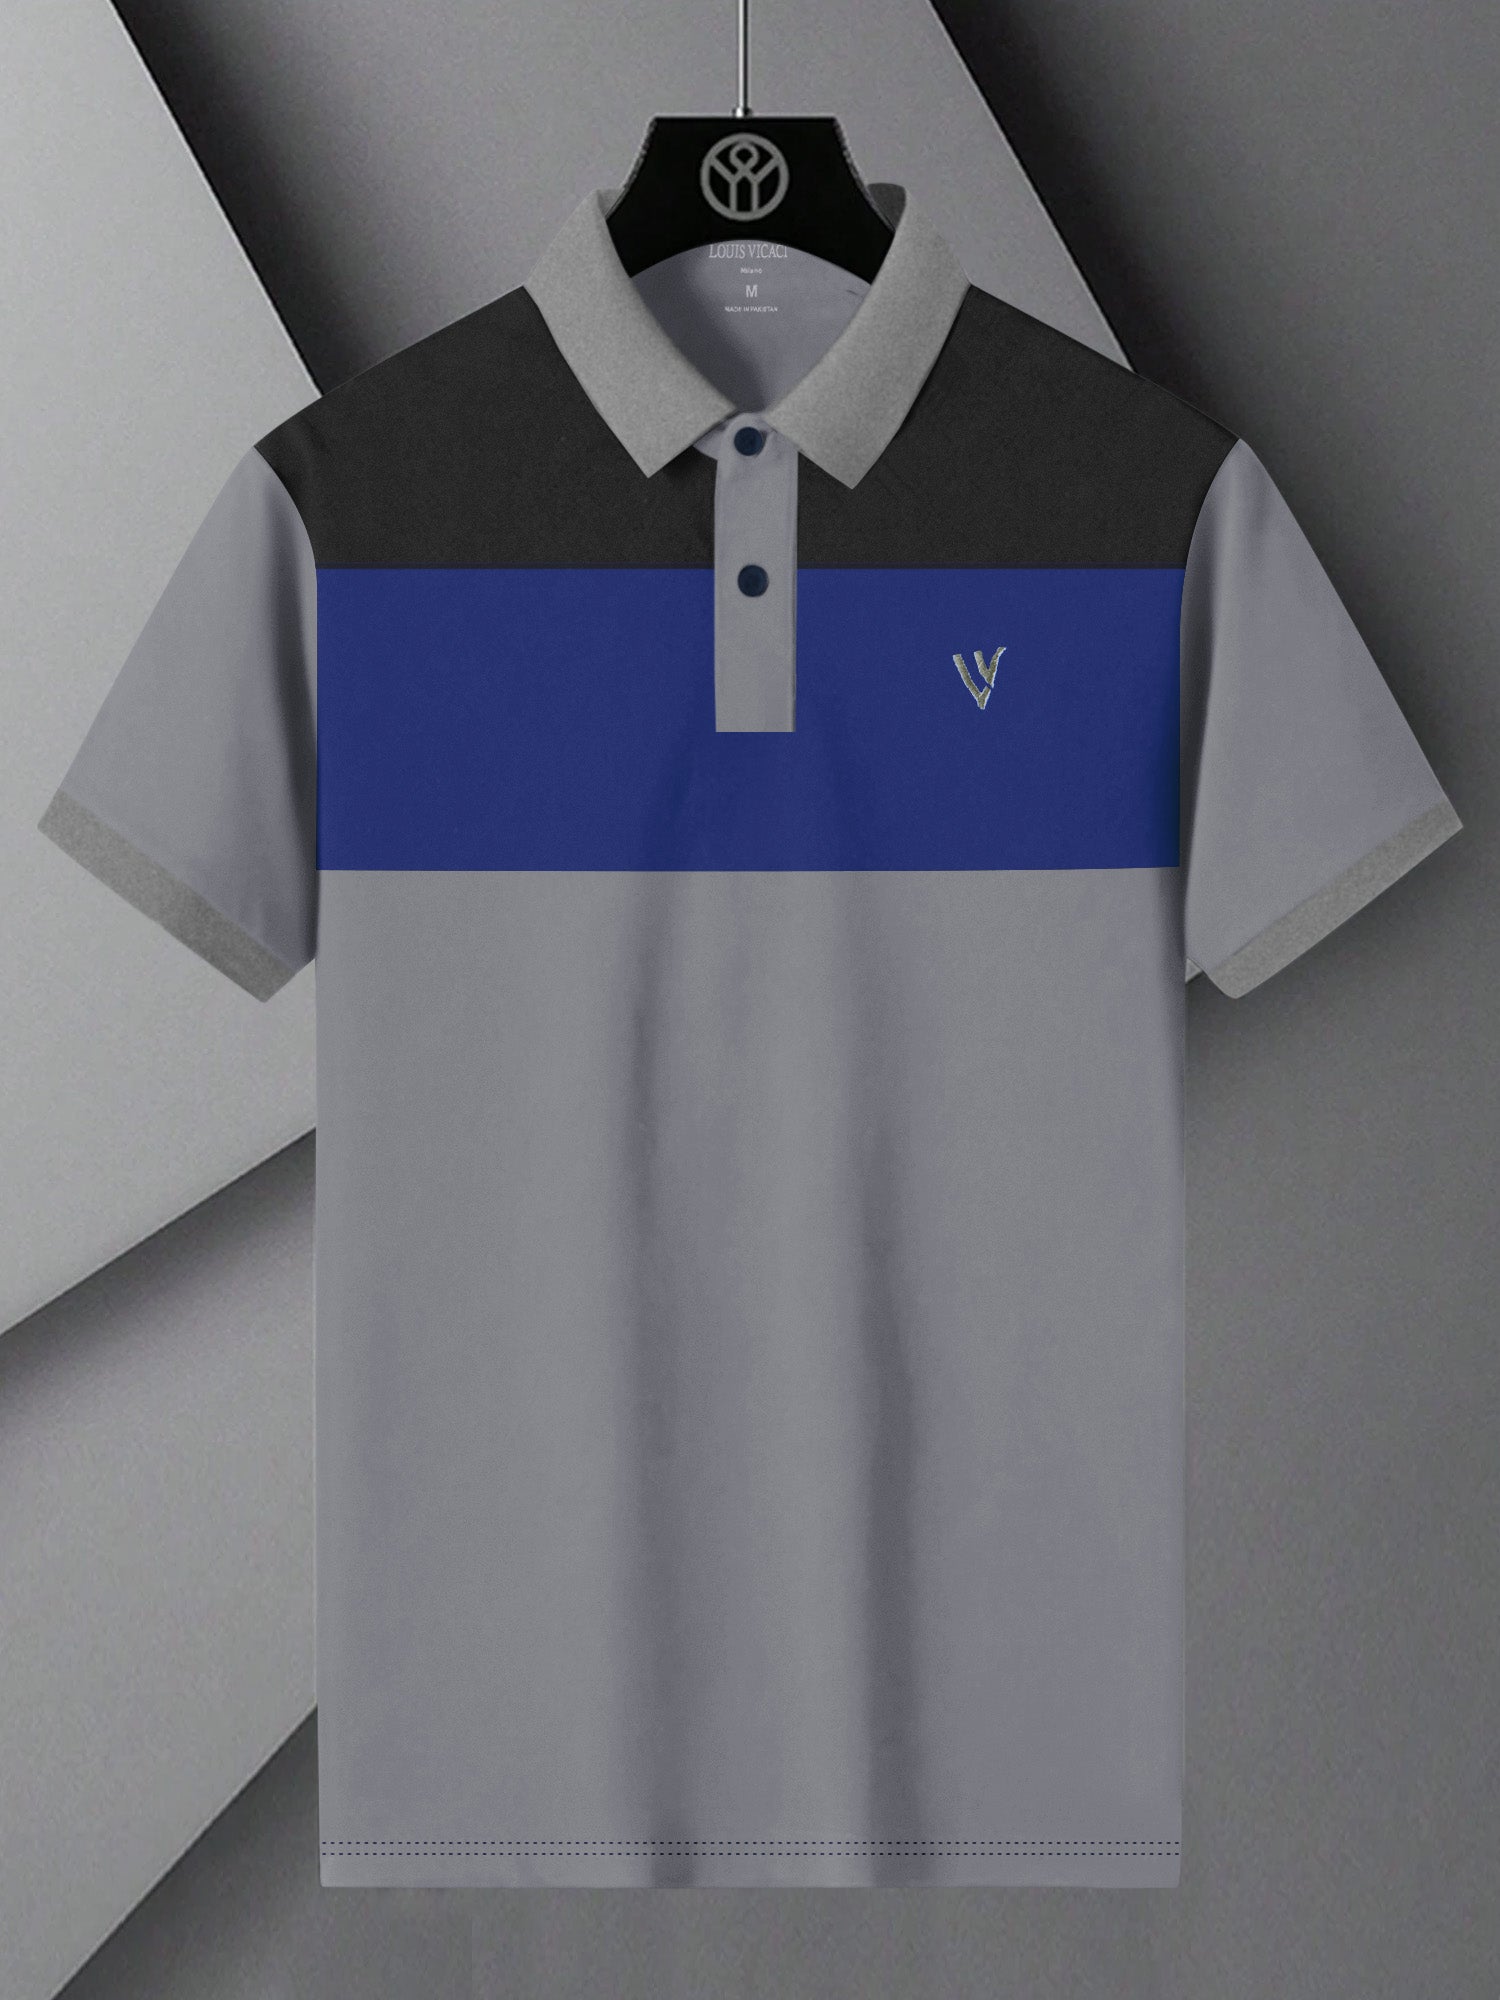 LV Summer Polo Shirt For Men-Slate Grey with Blue & Charcoal Panel-BE787/BR13034